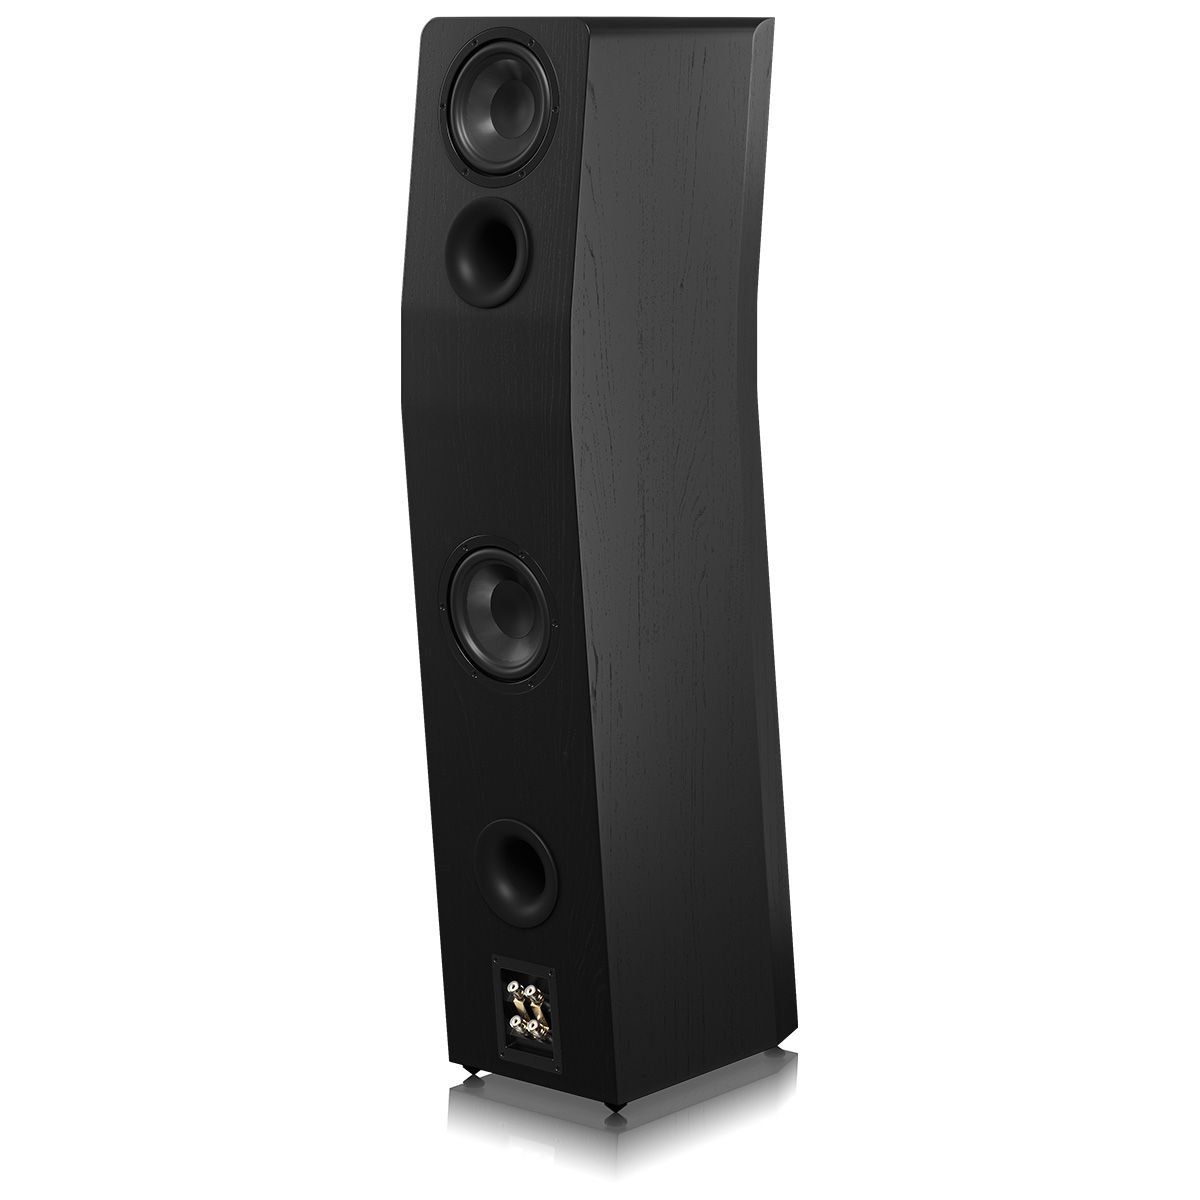 SVS Ultra Evolution Titan Floorstanding Loudspeaker - single black oak with grille - angled rear view with components